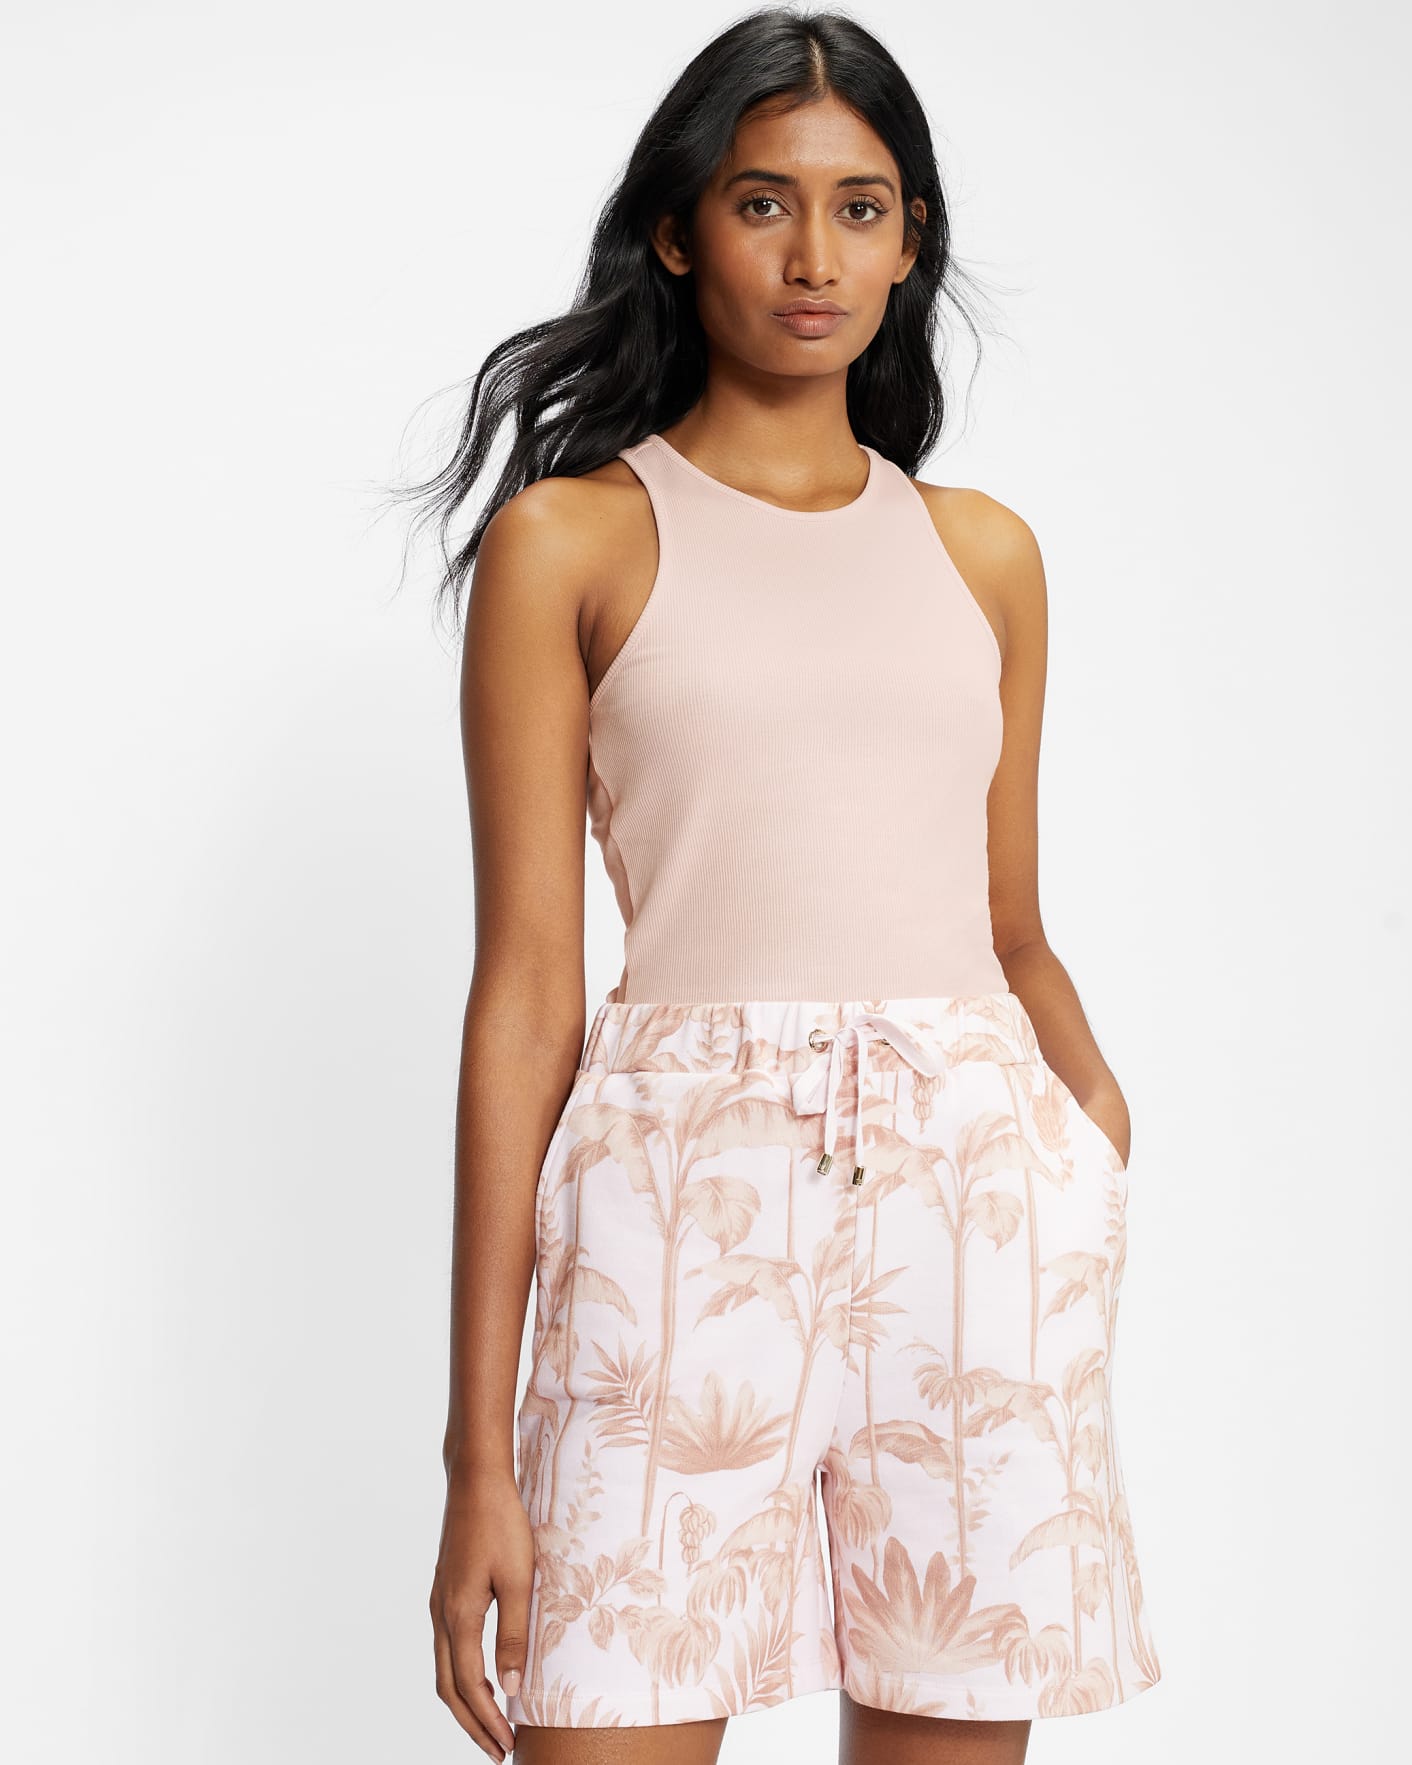 Pale Pink Ribbed Jersey Racer Tank Ted Baker